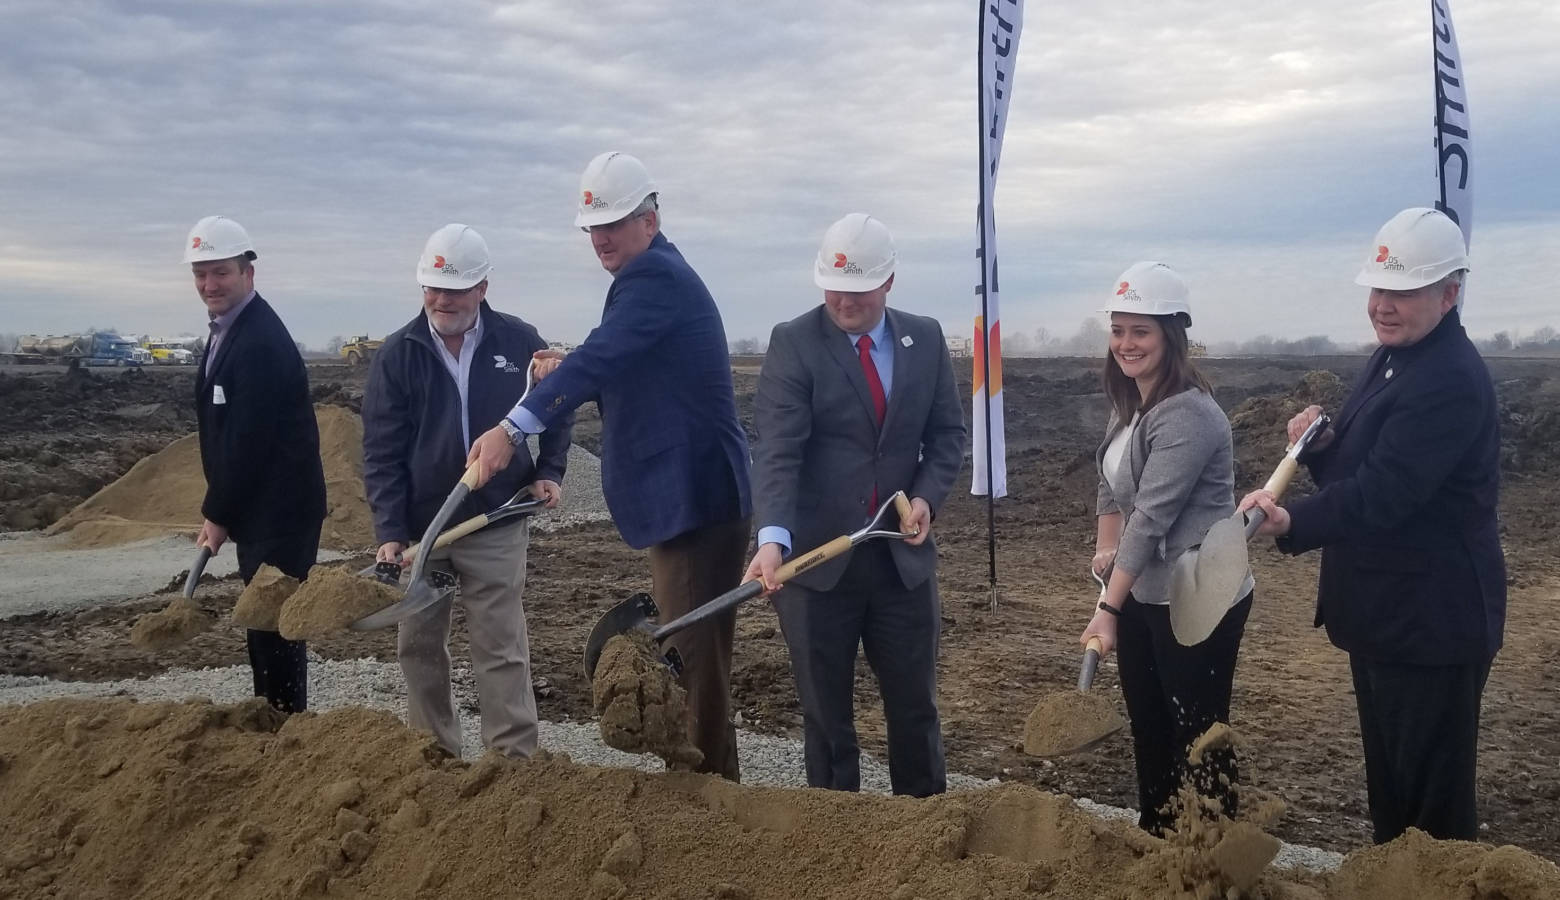 State and local officials along with DS Smith representatives break ground Friday for the UK packaging company's new facility in Lebanon. (Samantha Horton/IPB News)